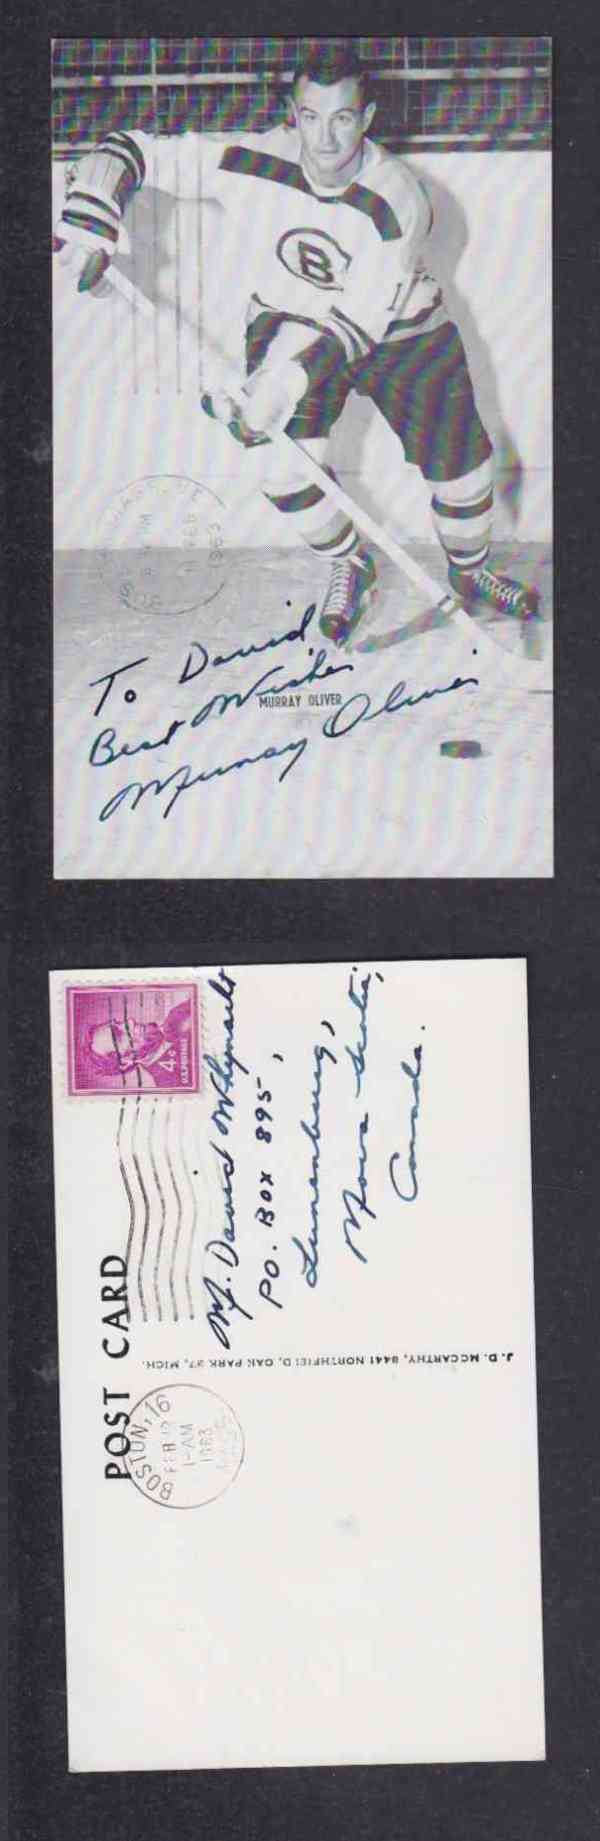 1960 'S BOSTON BRUINS M.OLIVER  AUTOGRAPHED POST CARD photo